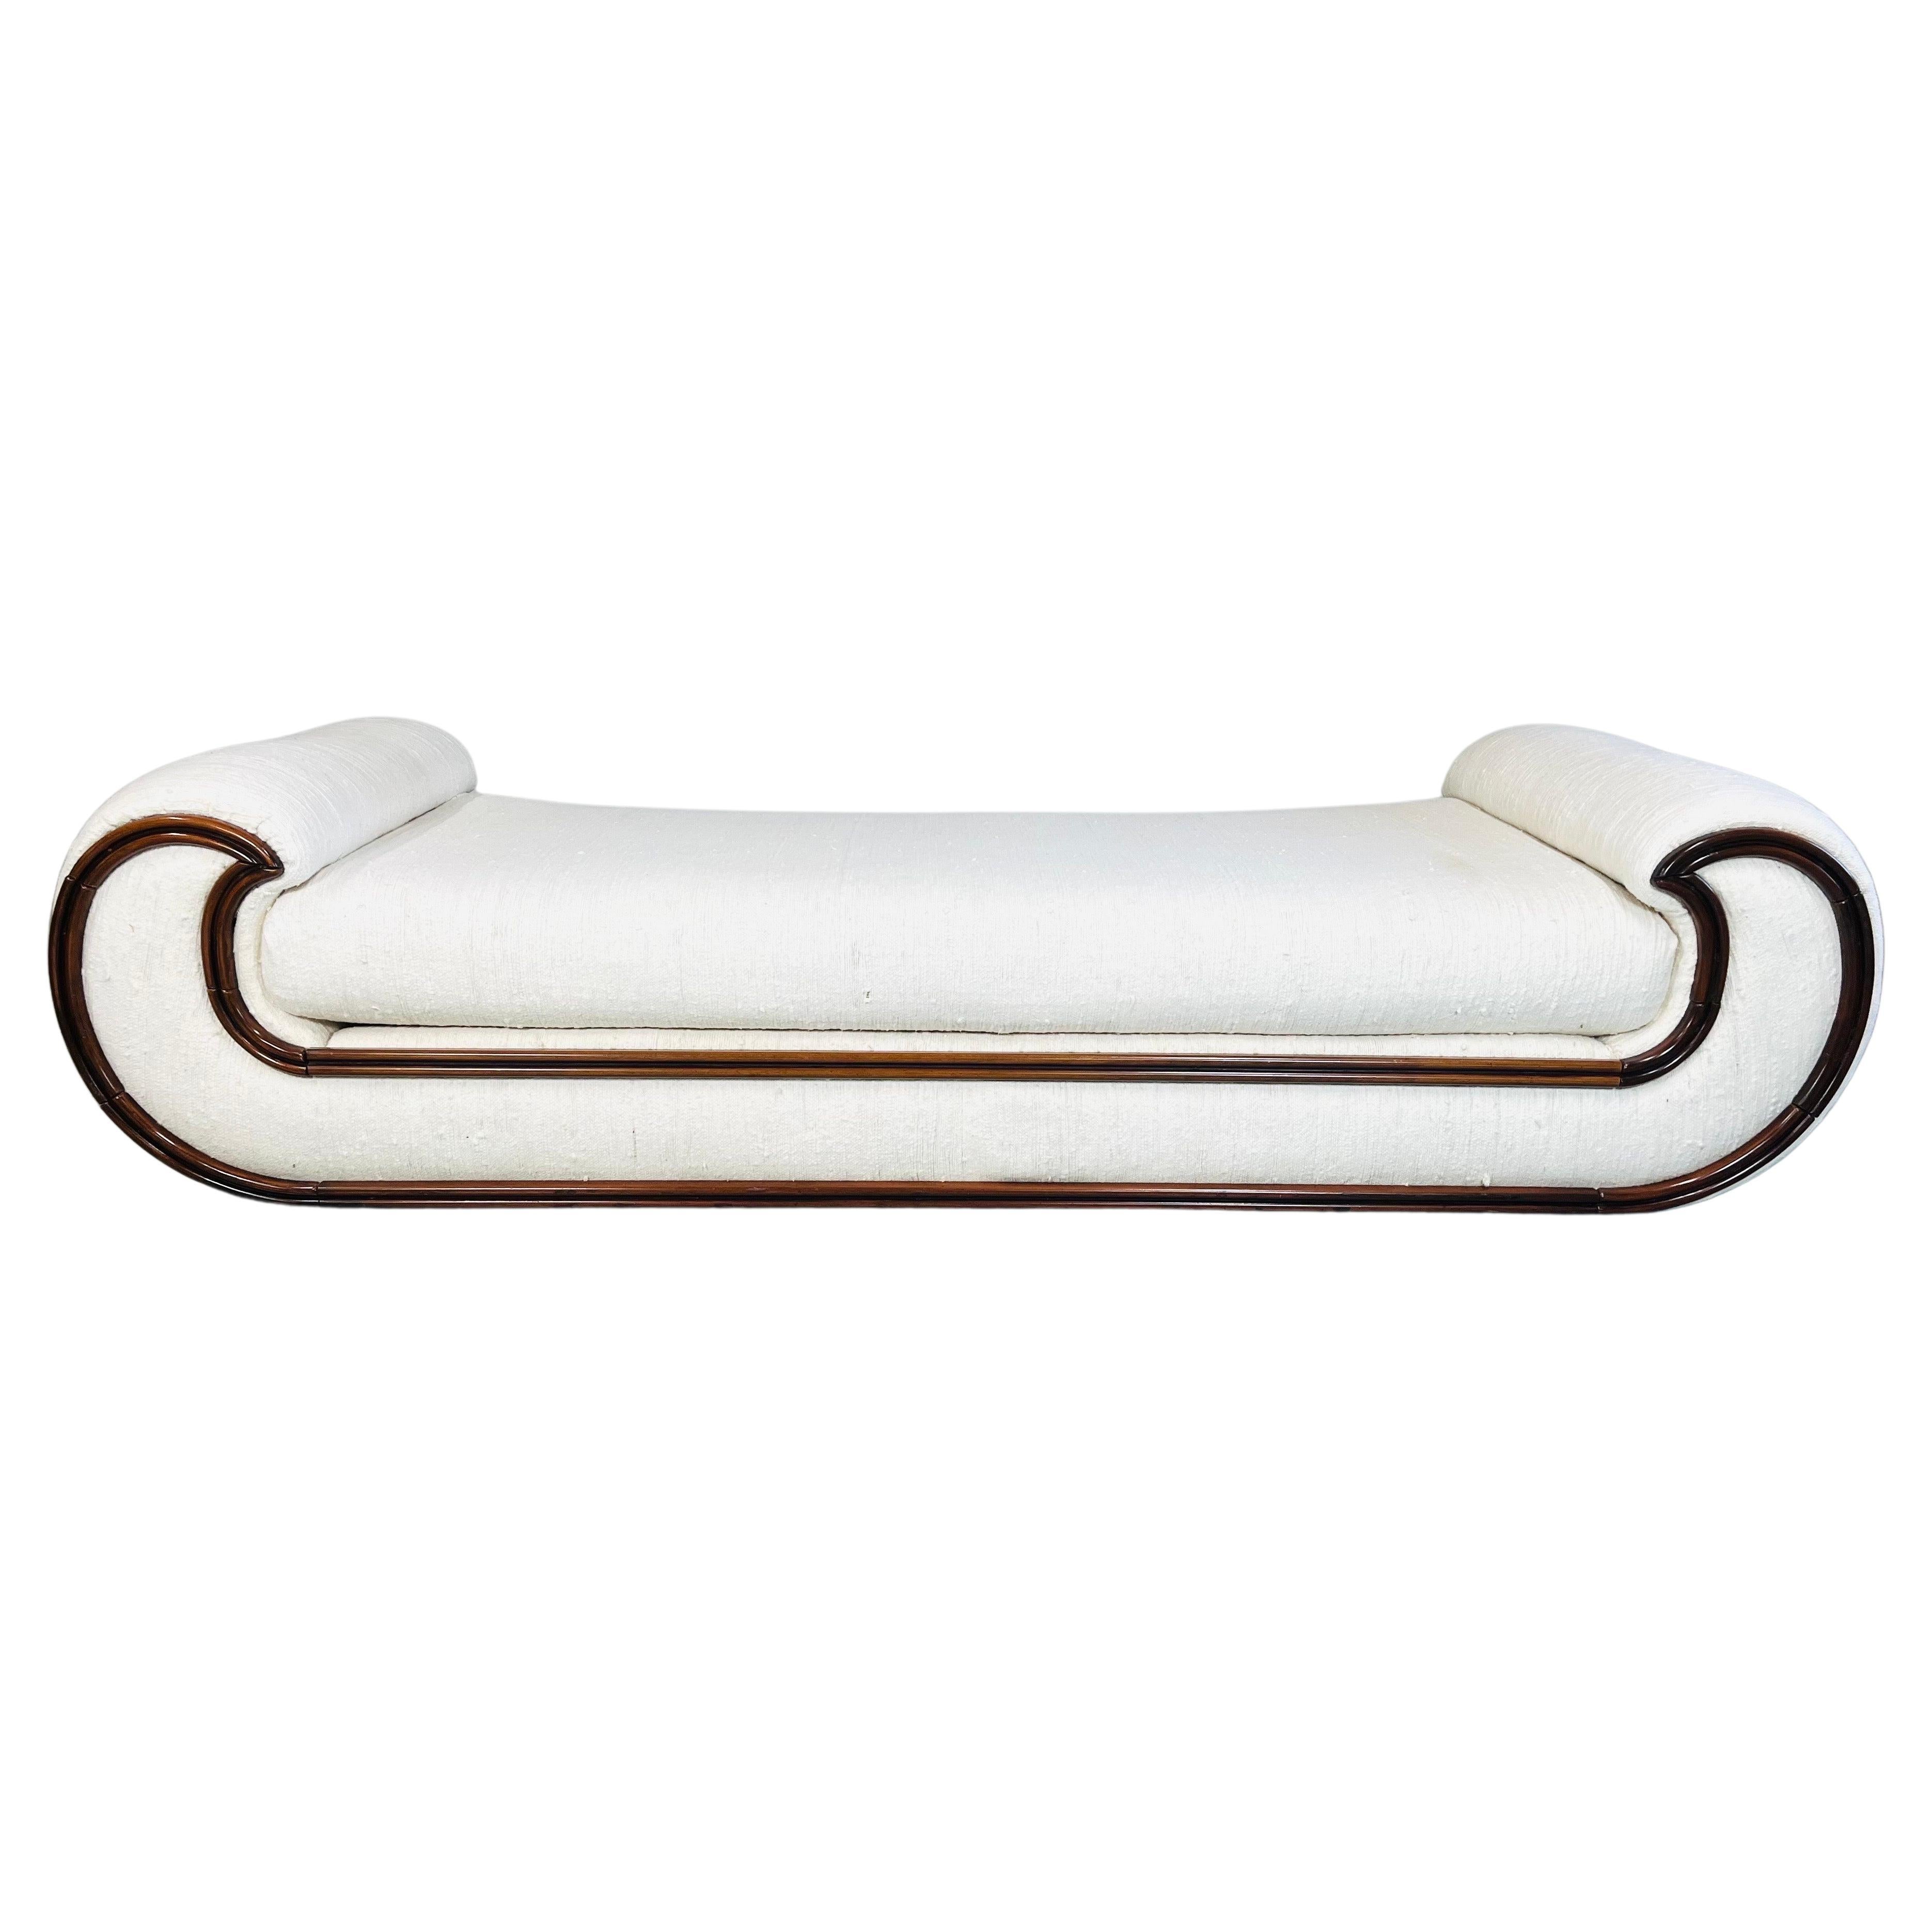 1970's Hollywood Regency Chaise Lounge or Daybed by Vivai del Sud, Italy